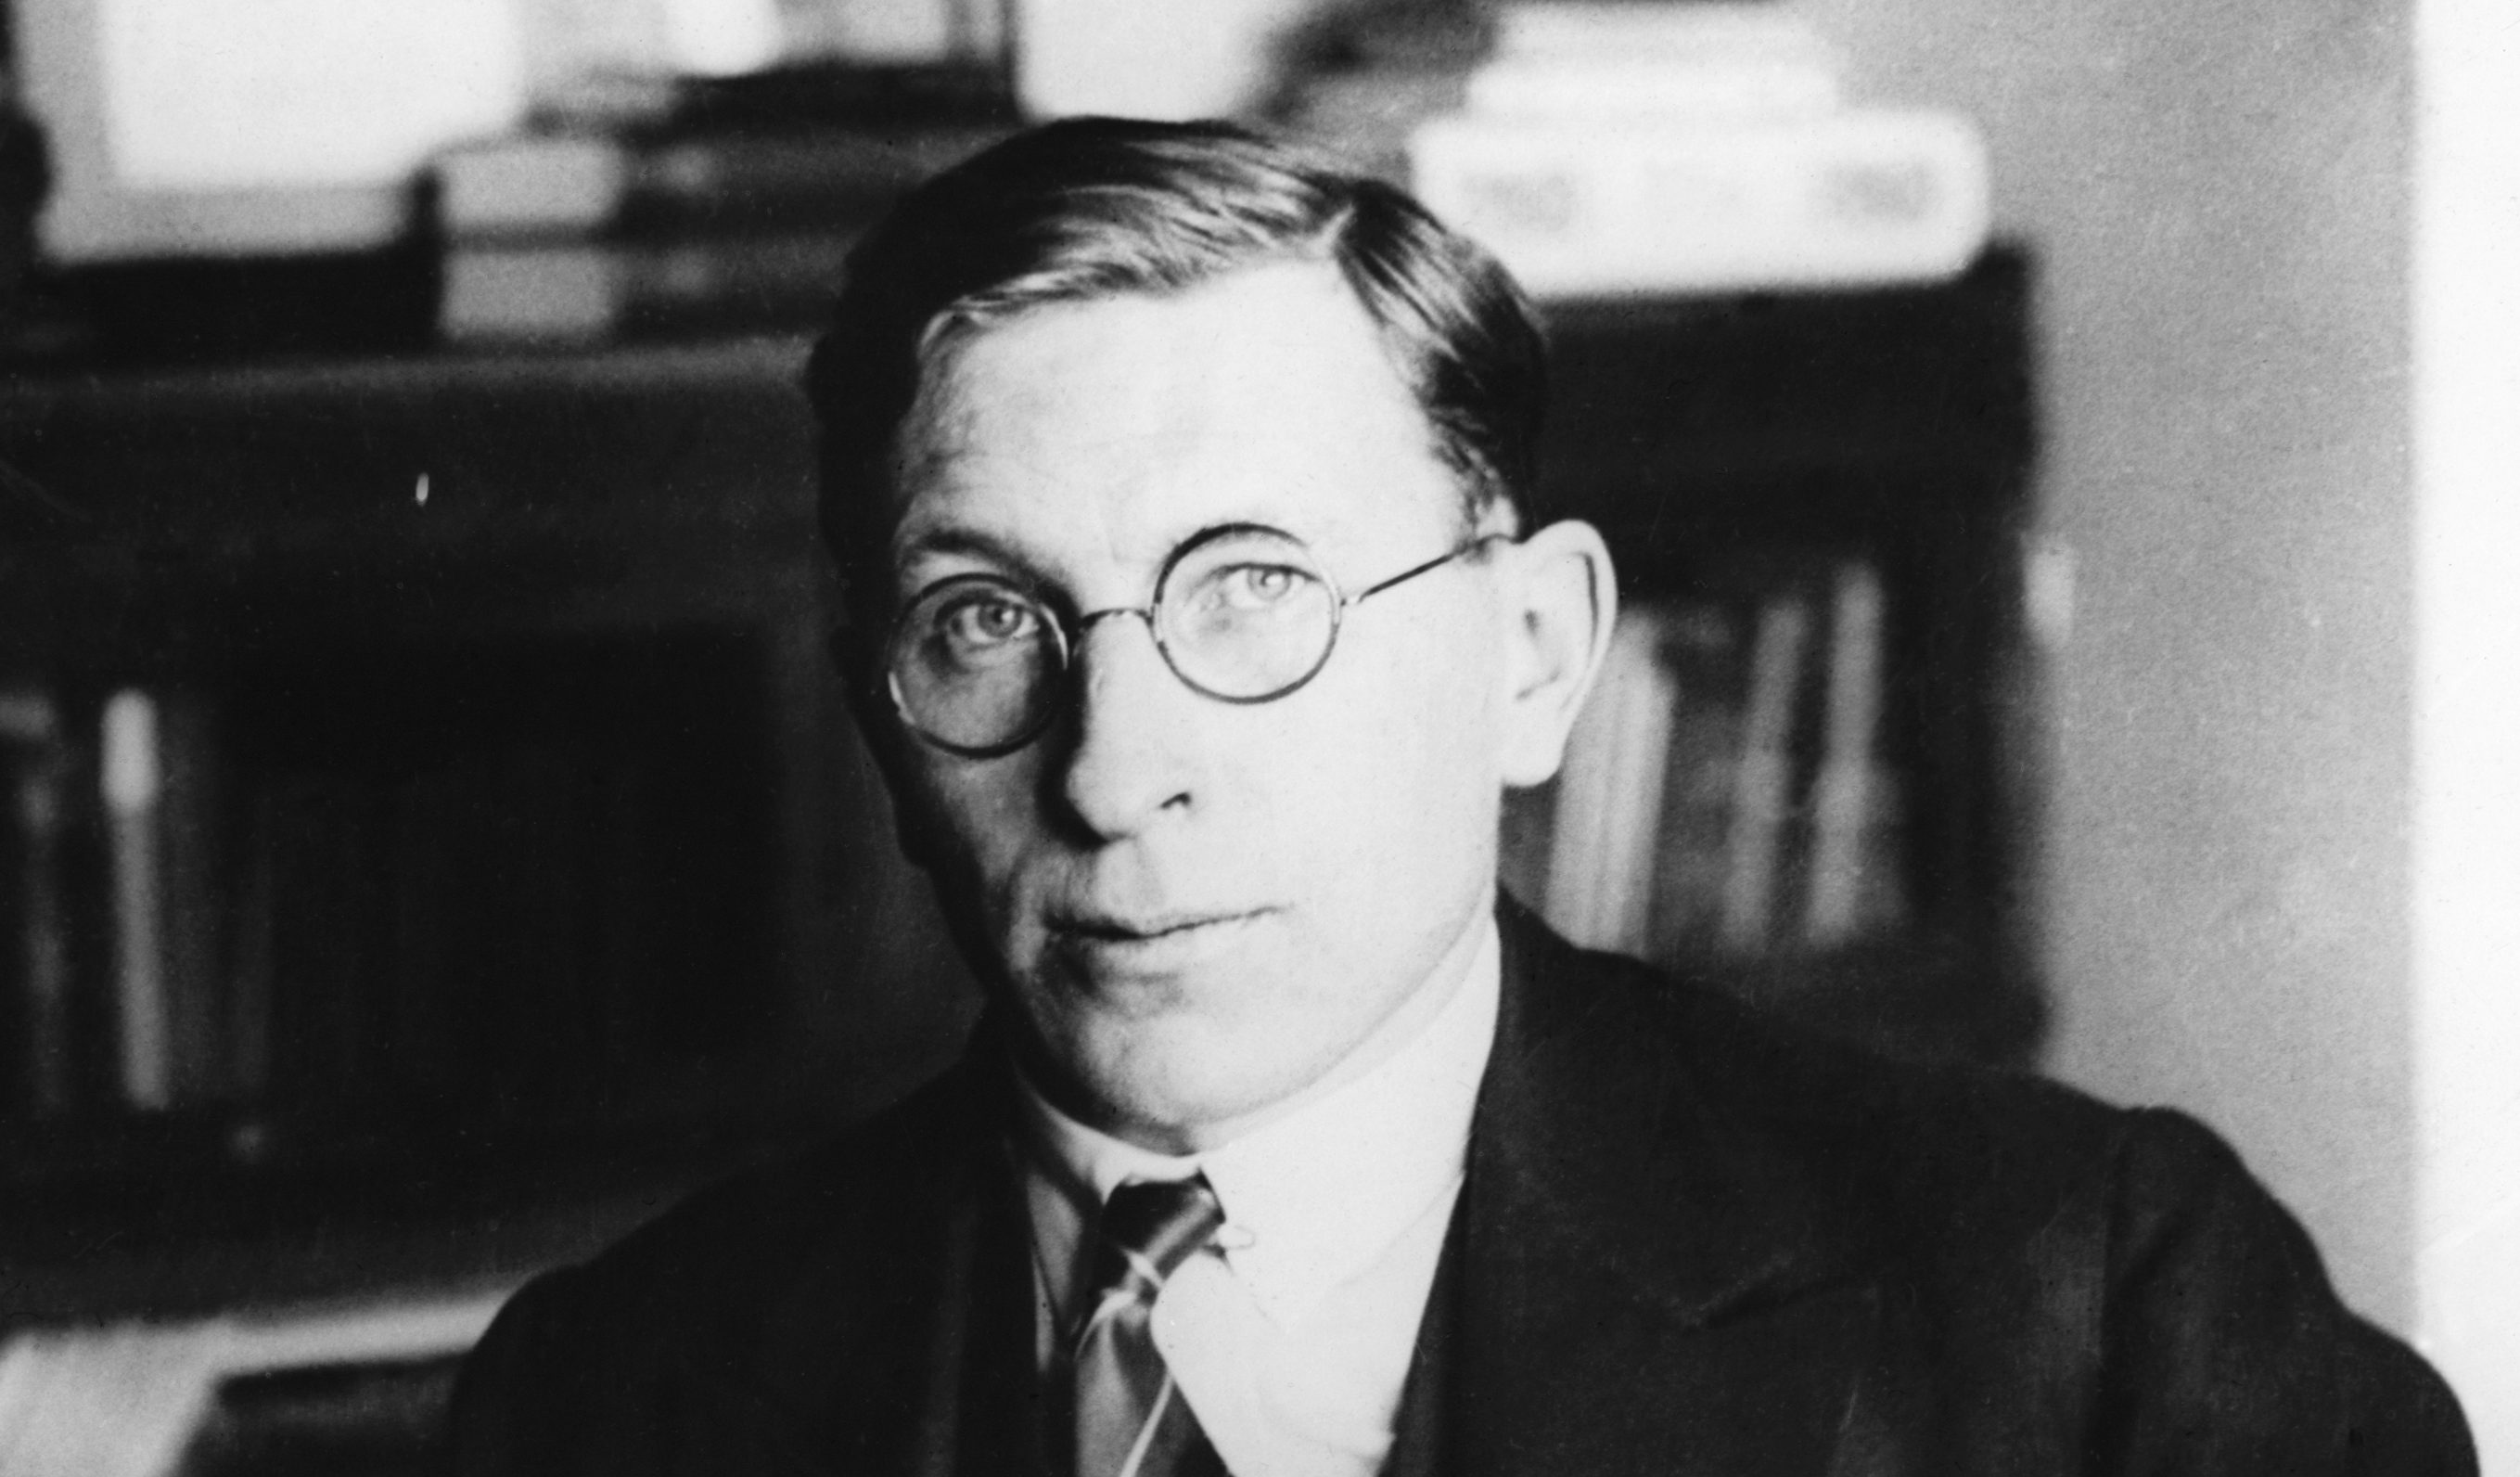 Saturday marks 100 years since Sir Frederick Banting's idea that led t...